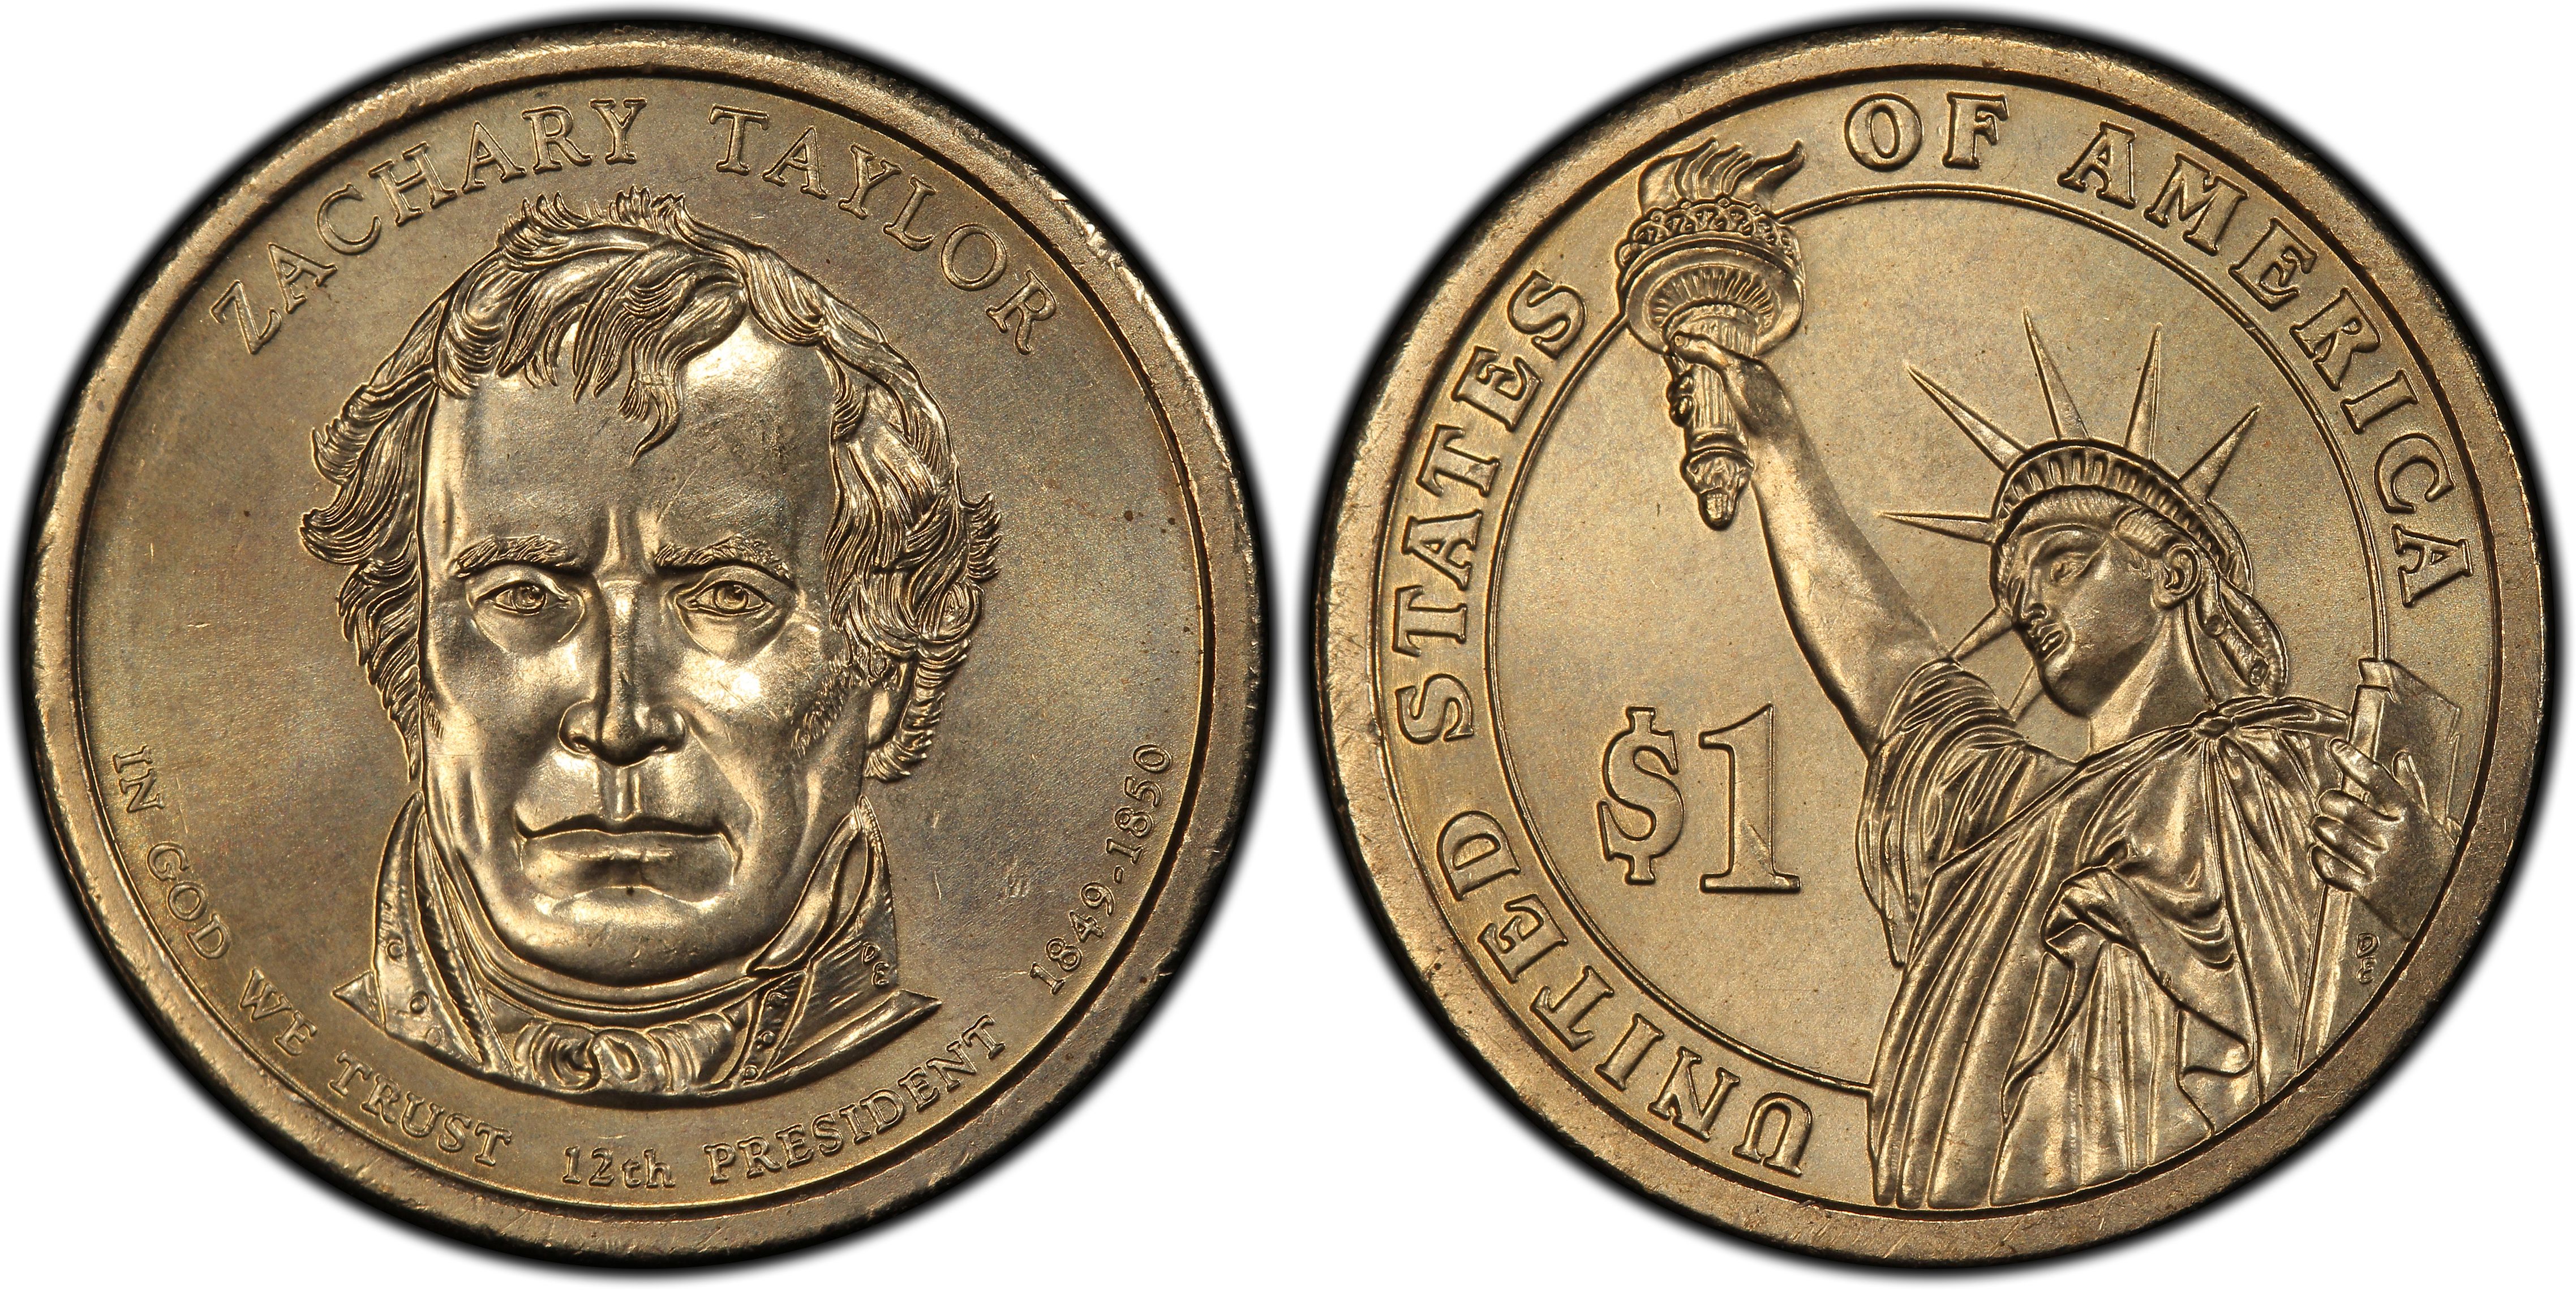 Details about   2009 ZACHARY TAYLOR $ MARGARET PRESIDENTIAL DOLLAR & FIRST SPOUSE MINT MEDAL SET 